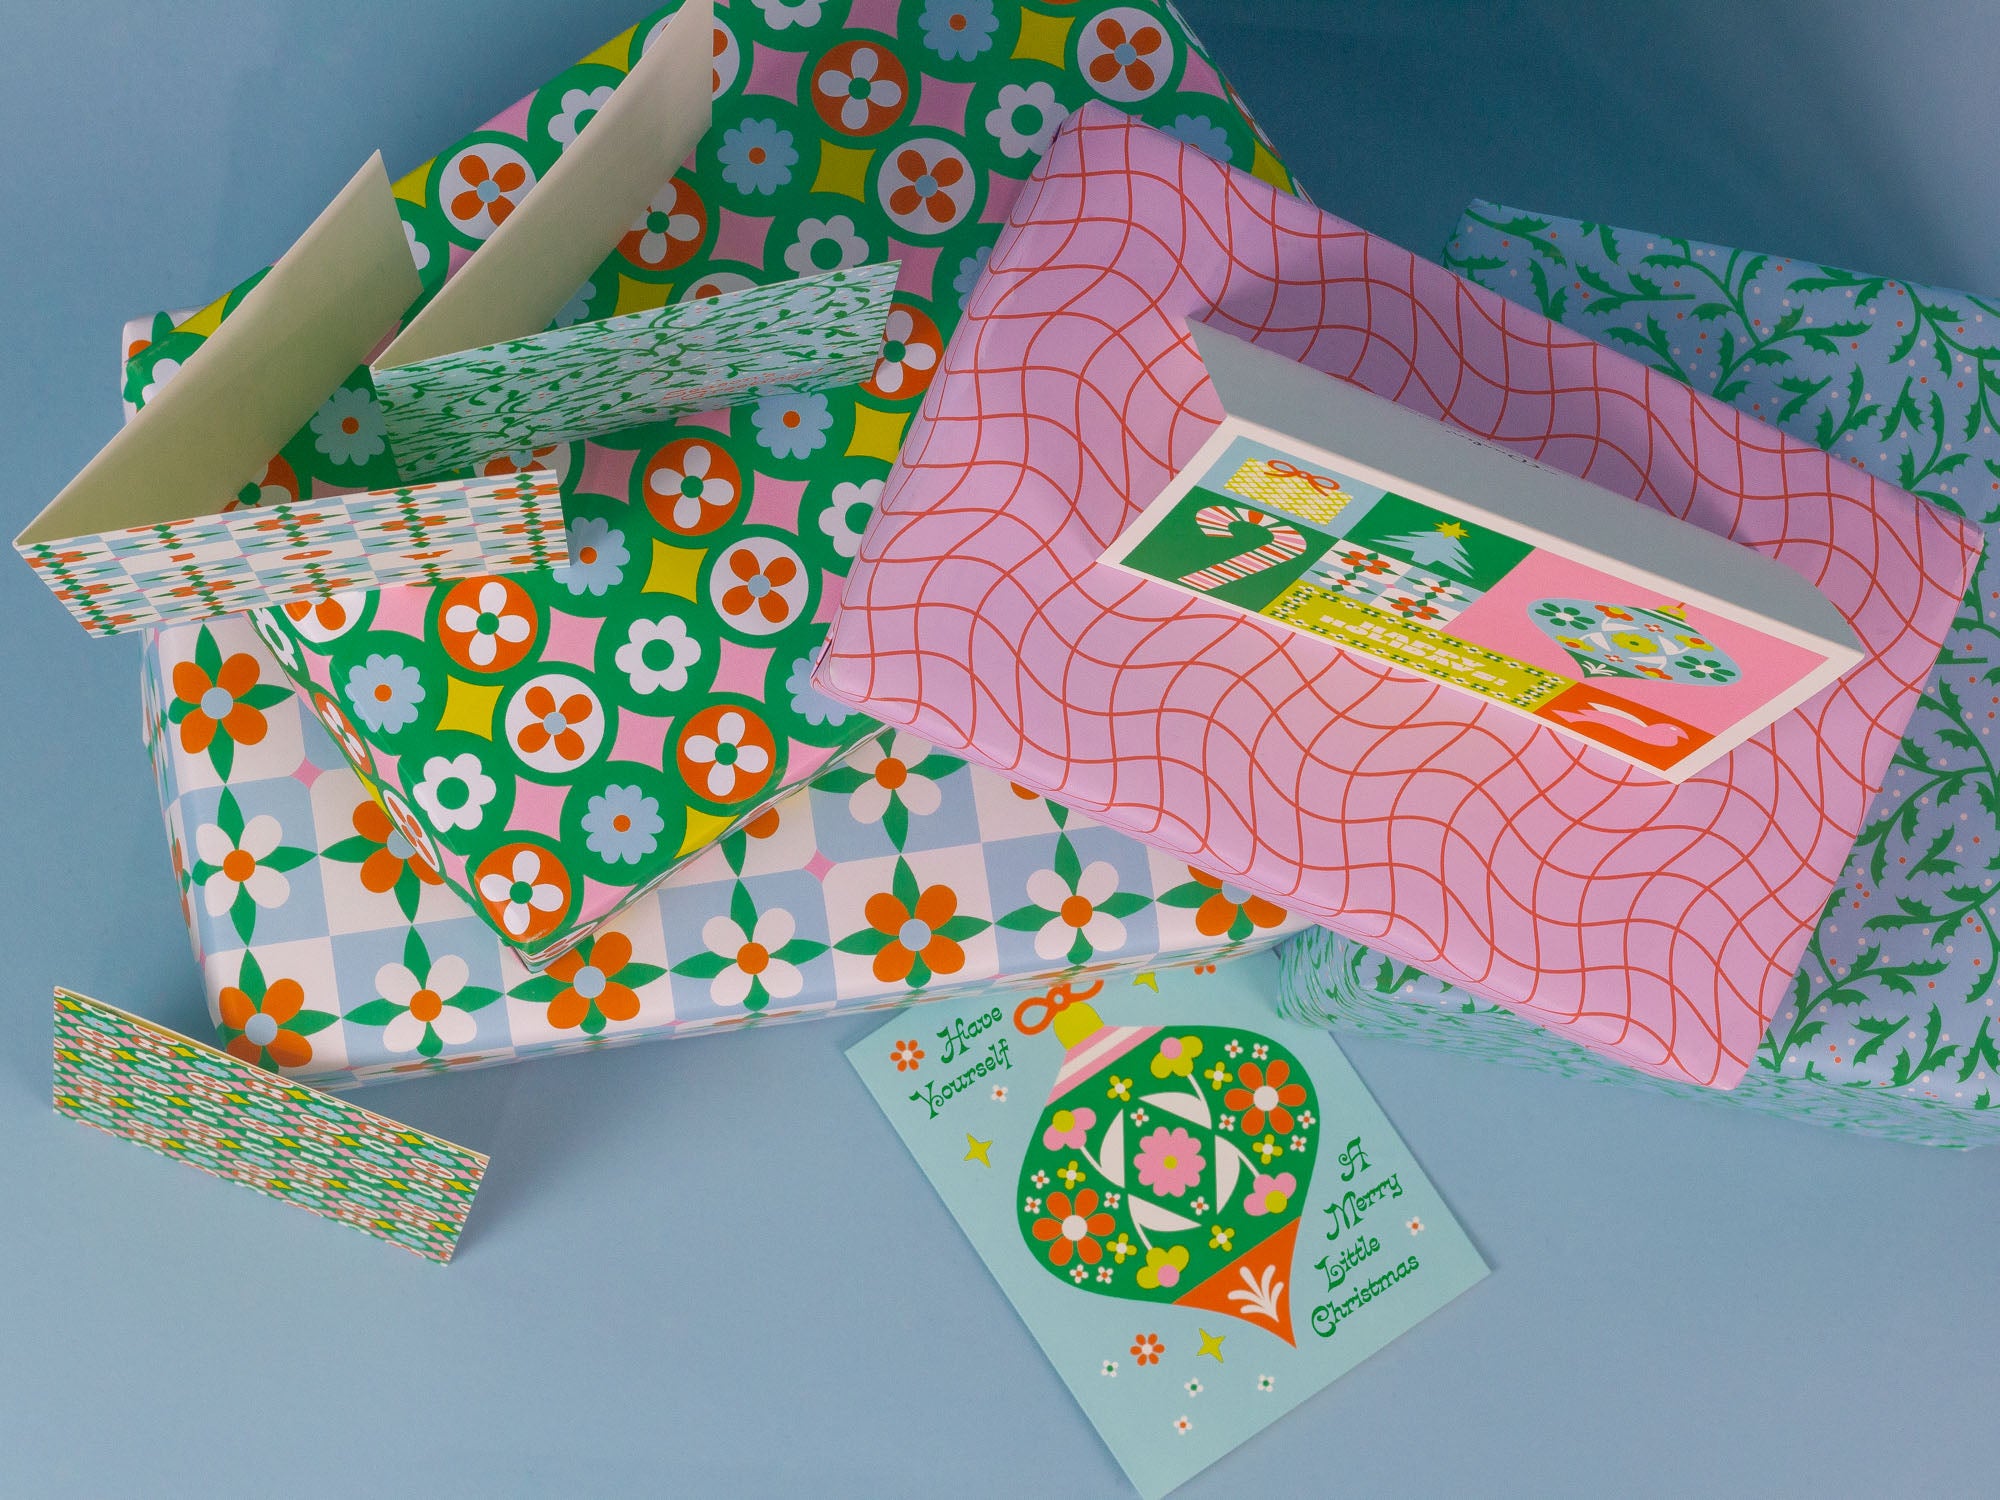 Have Yourself a Merry Little Christmas open holiday card and close up of retro floral Christmas wrapping paper.